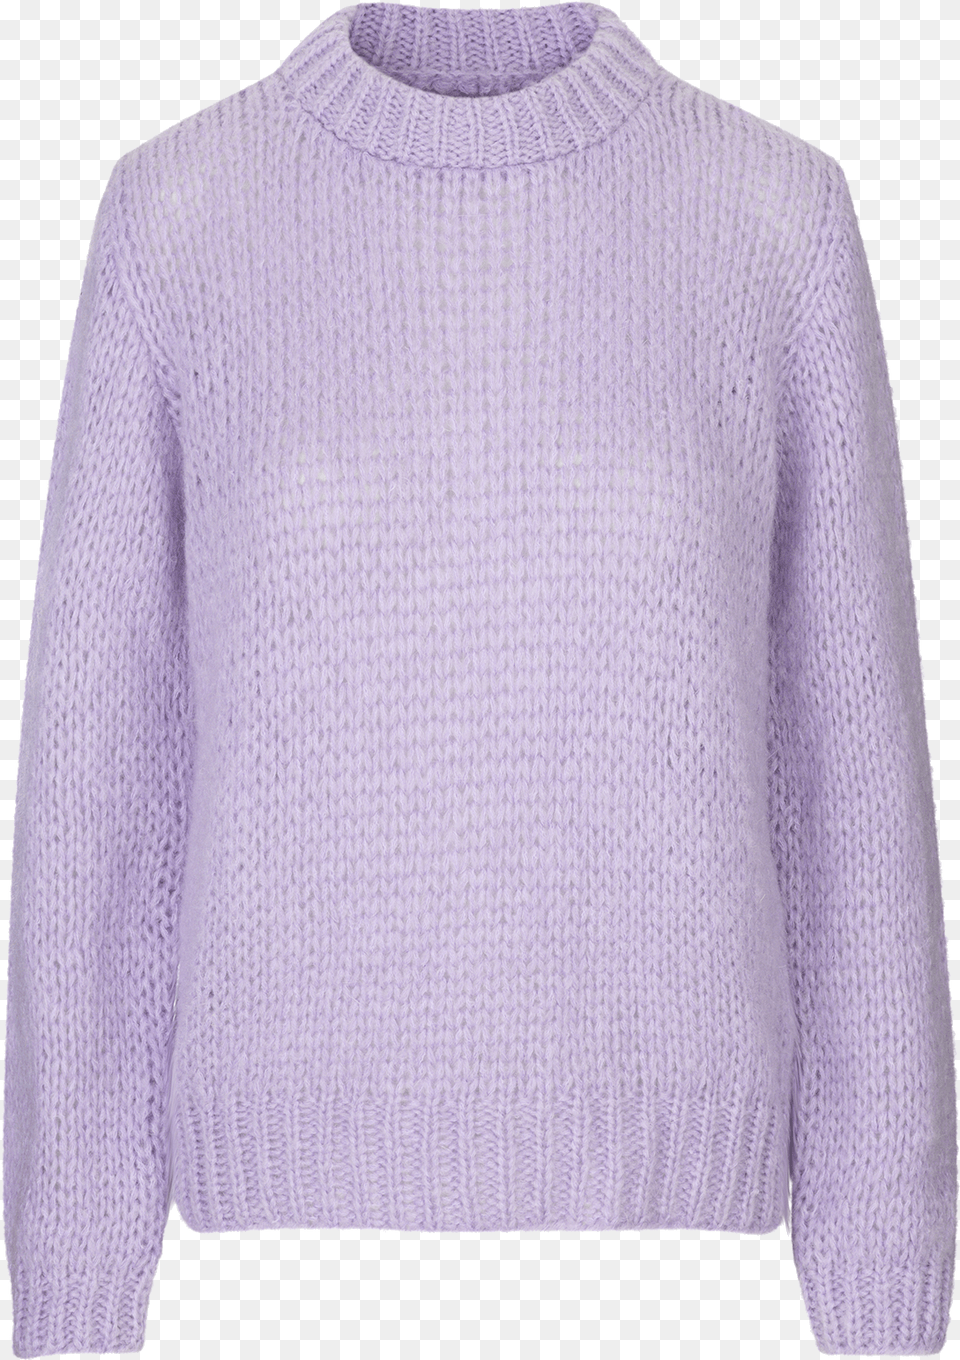 Sweater, Clothing, Knitwear Free Png